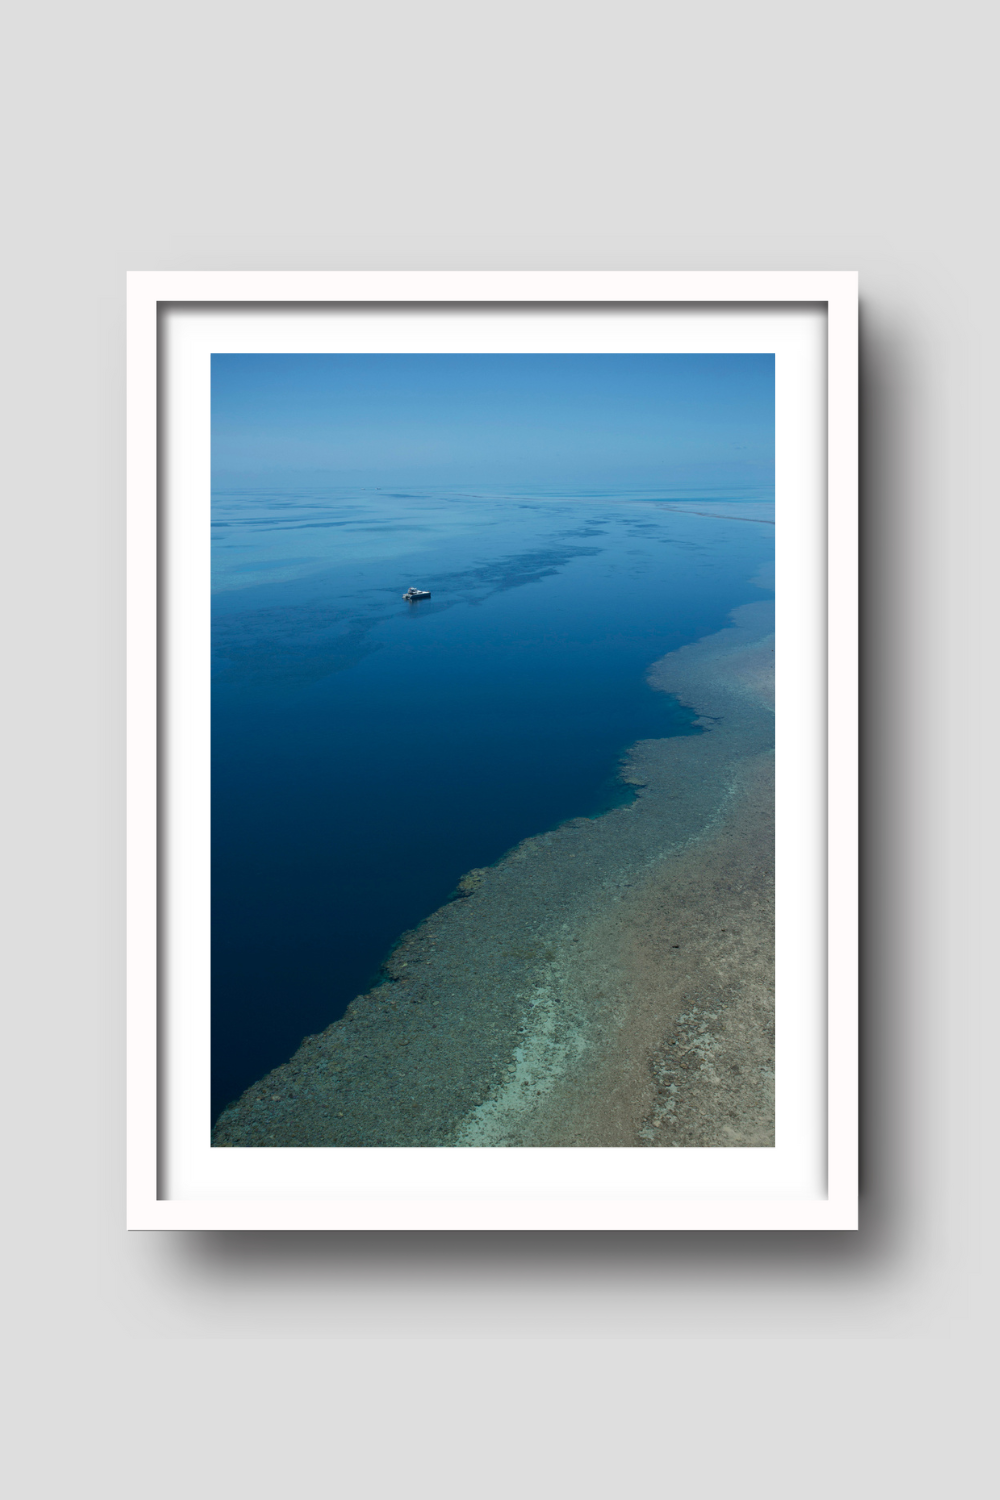 open blue ocean with a brown reef in the foreground a vessel on anchor amongst calm blue waters beyond